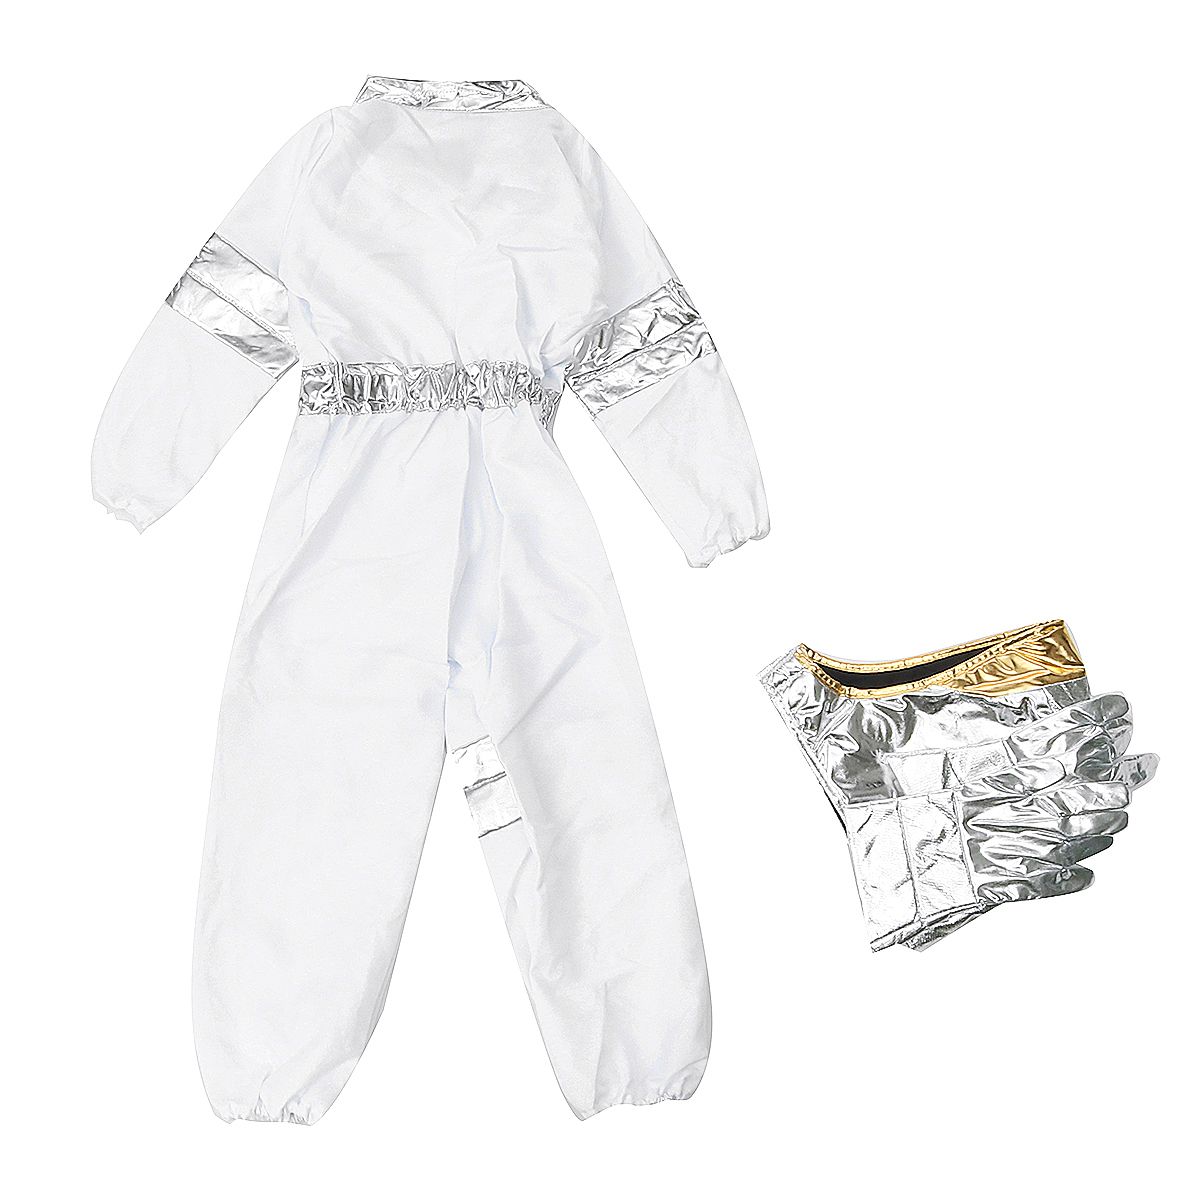 Childs-Kids-Astronaut-Costume-Space-Suit-Toddler-Astronaut-Role-Play-Props-1578933